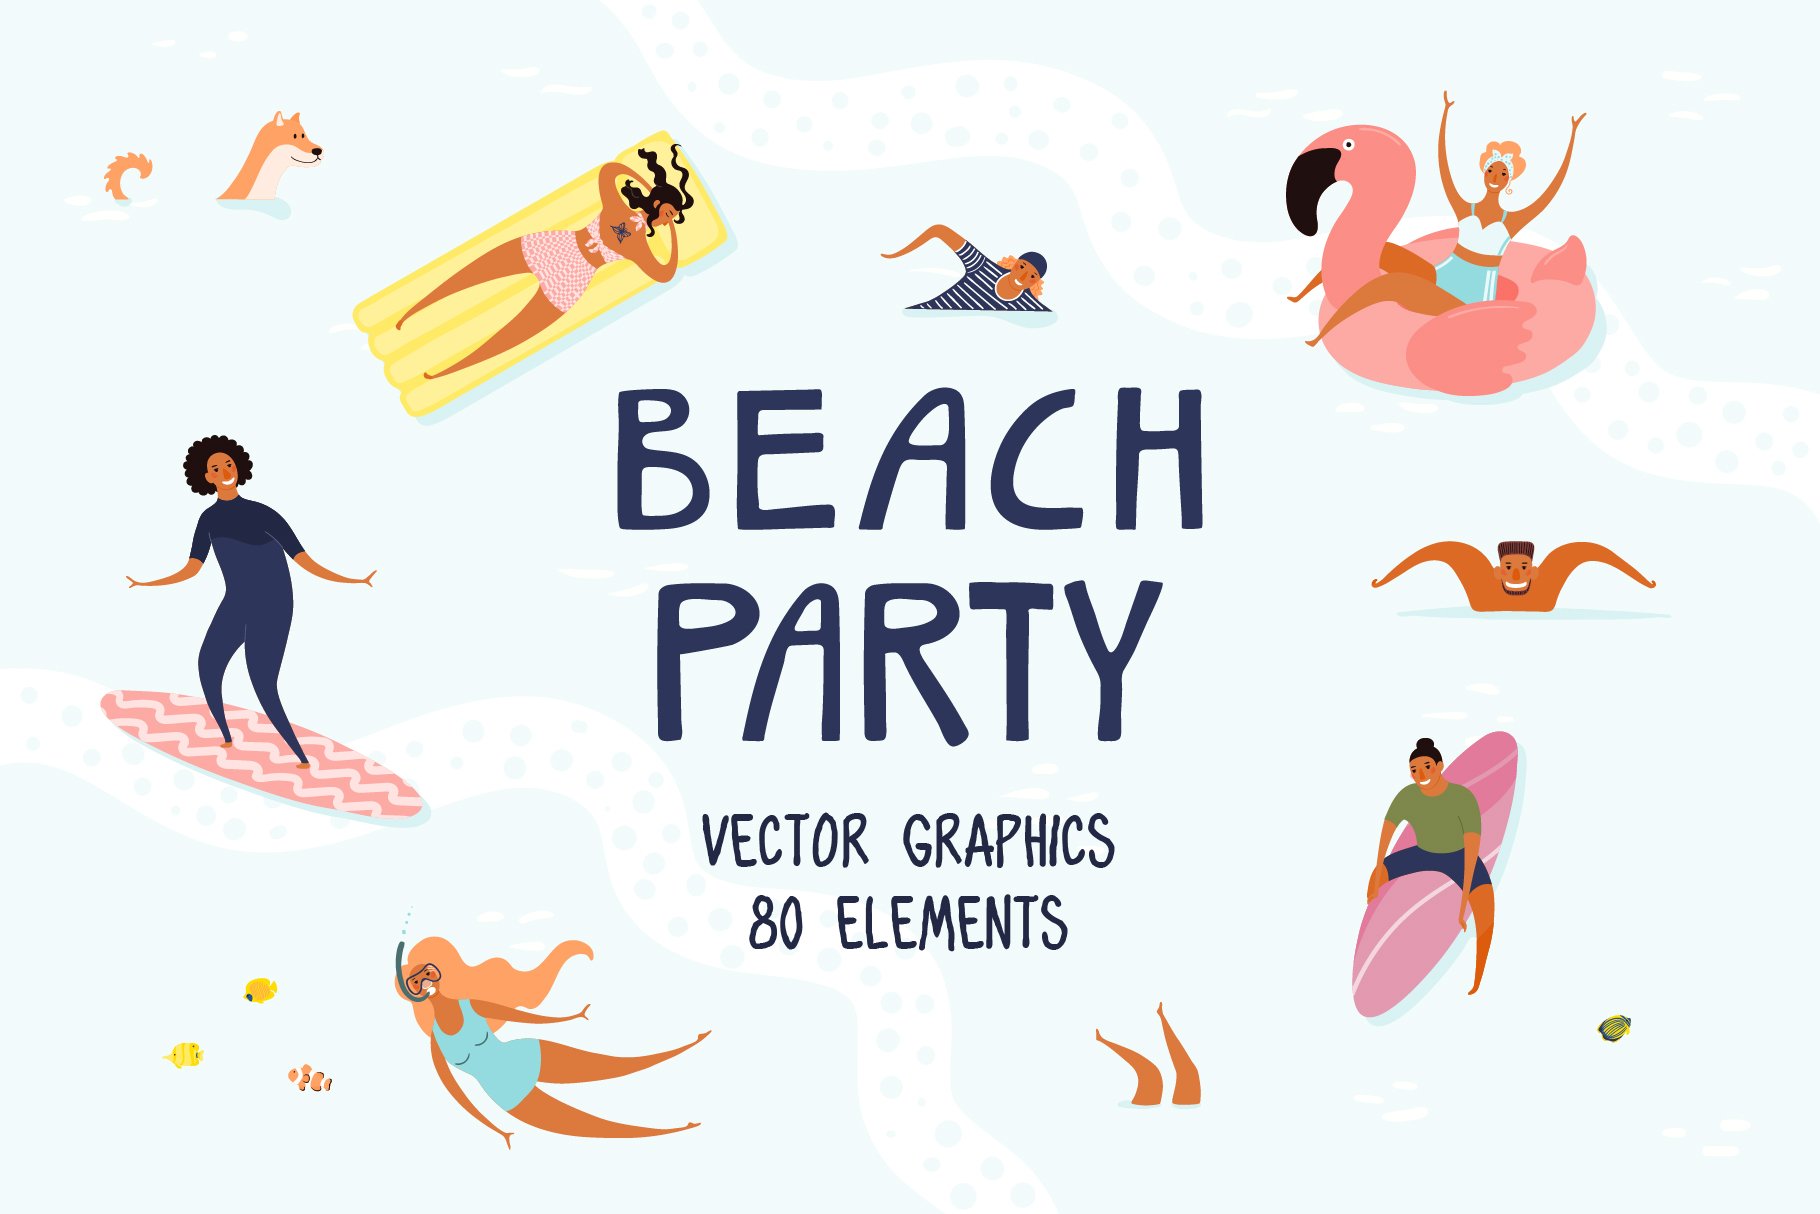 Beach Party, Summer Vector Graphics cover image.